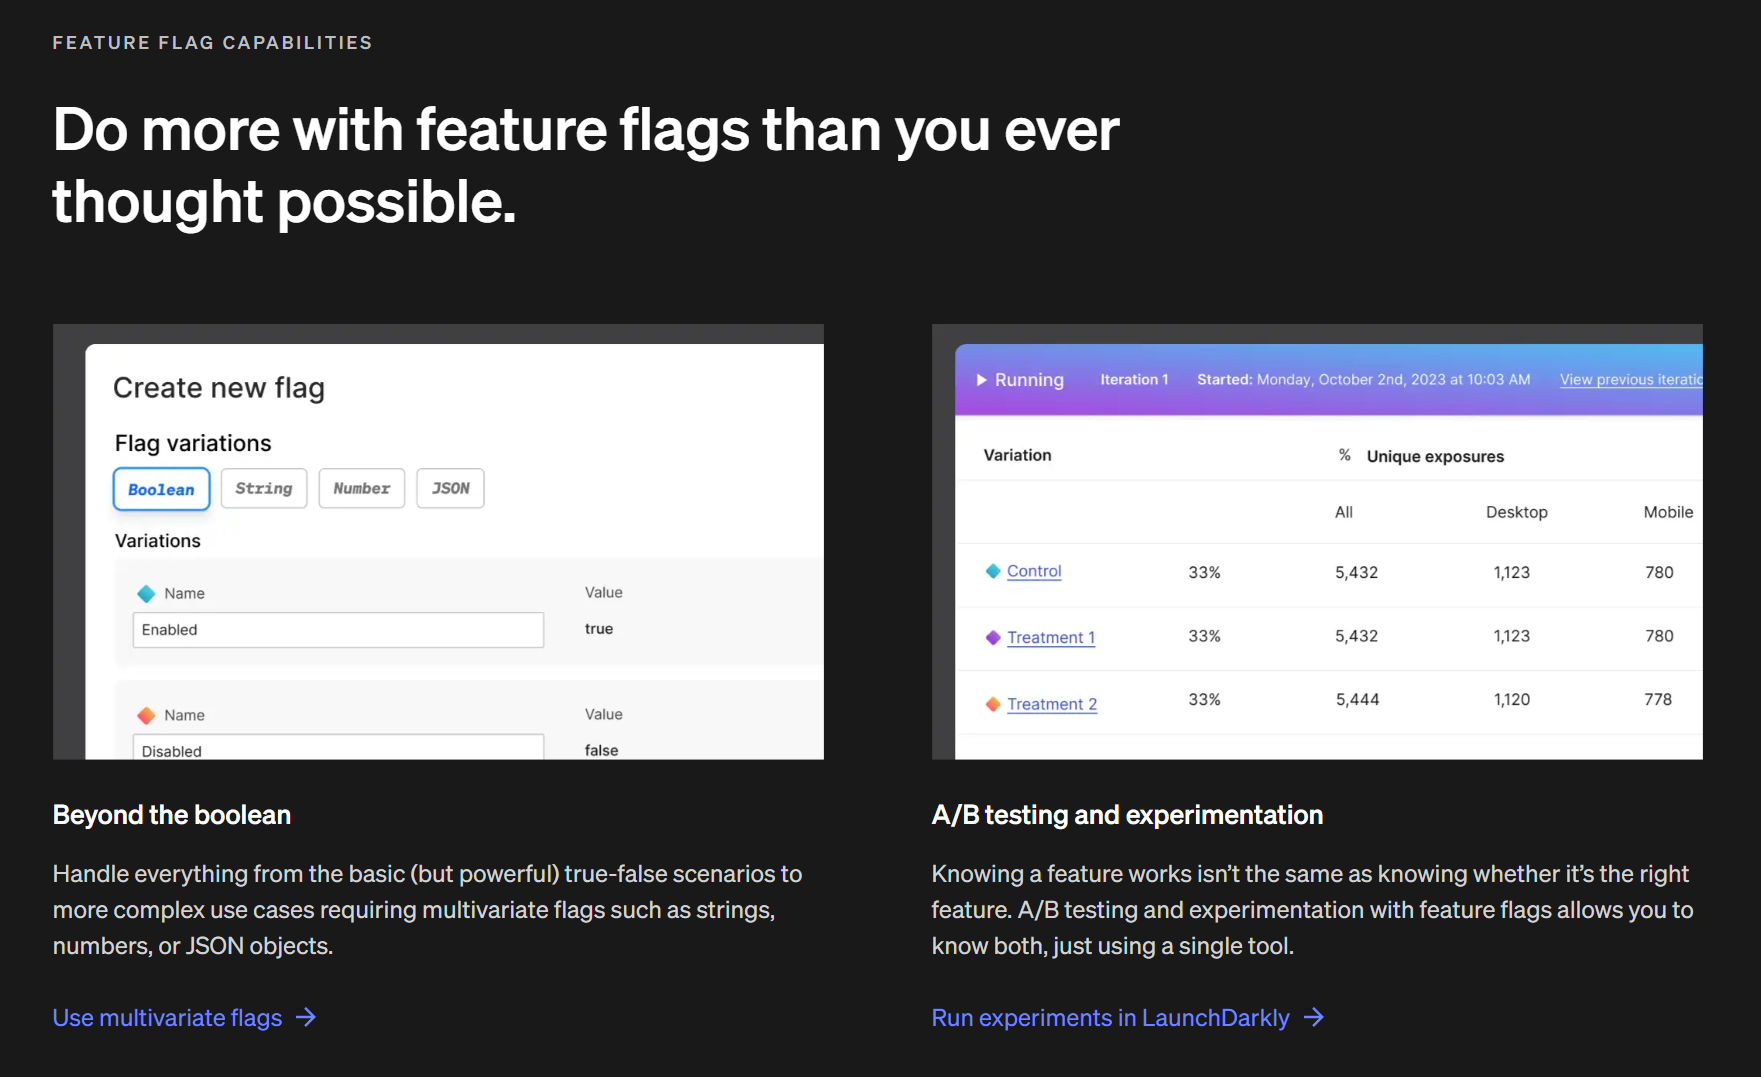 LaunchDarkly empowers readers with information about what they can do with feature flags